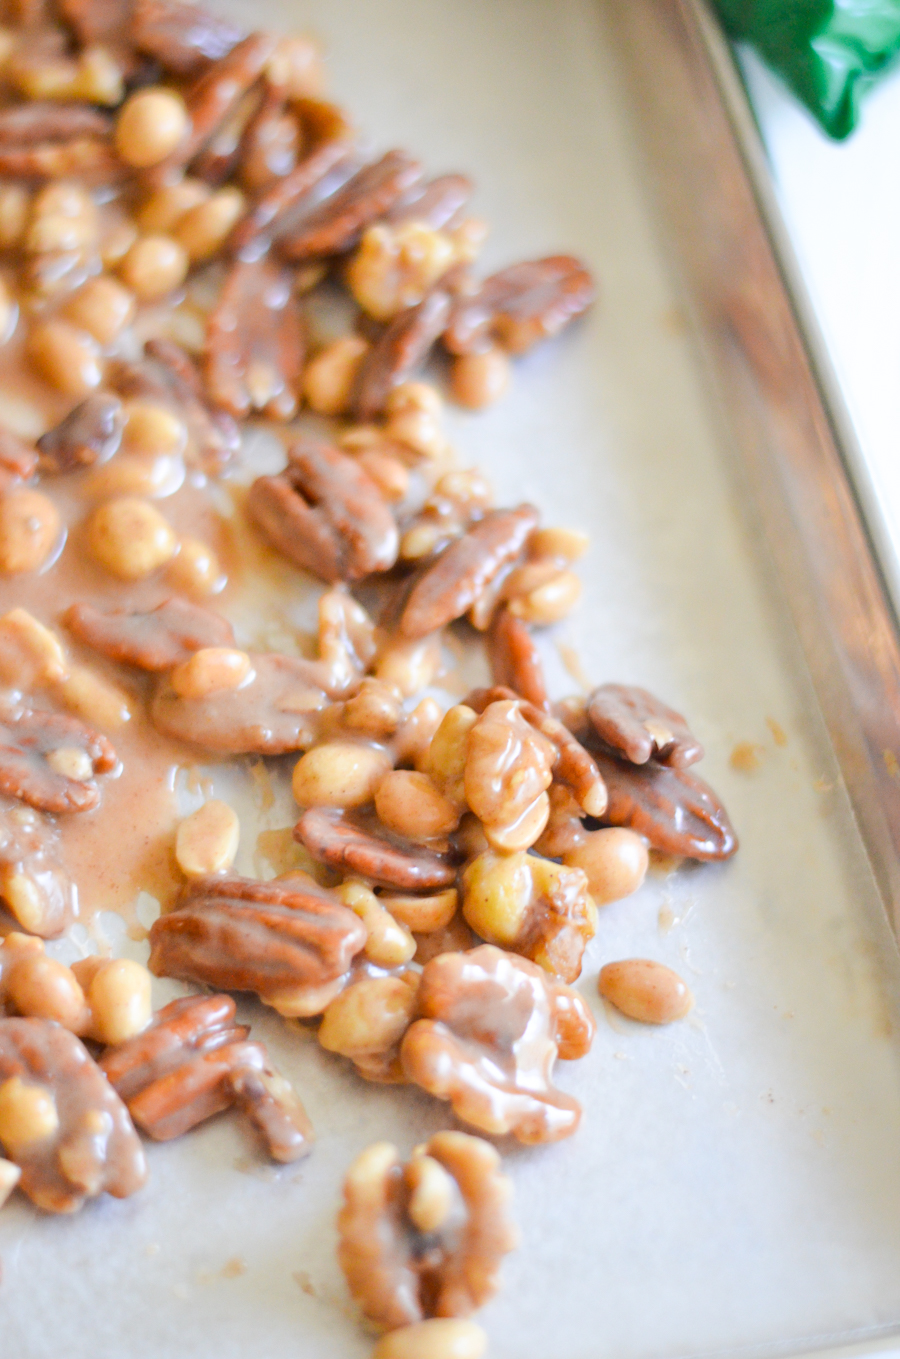 Sugared Mixed Nuts on Stovetop